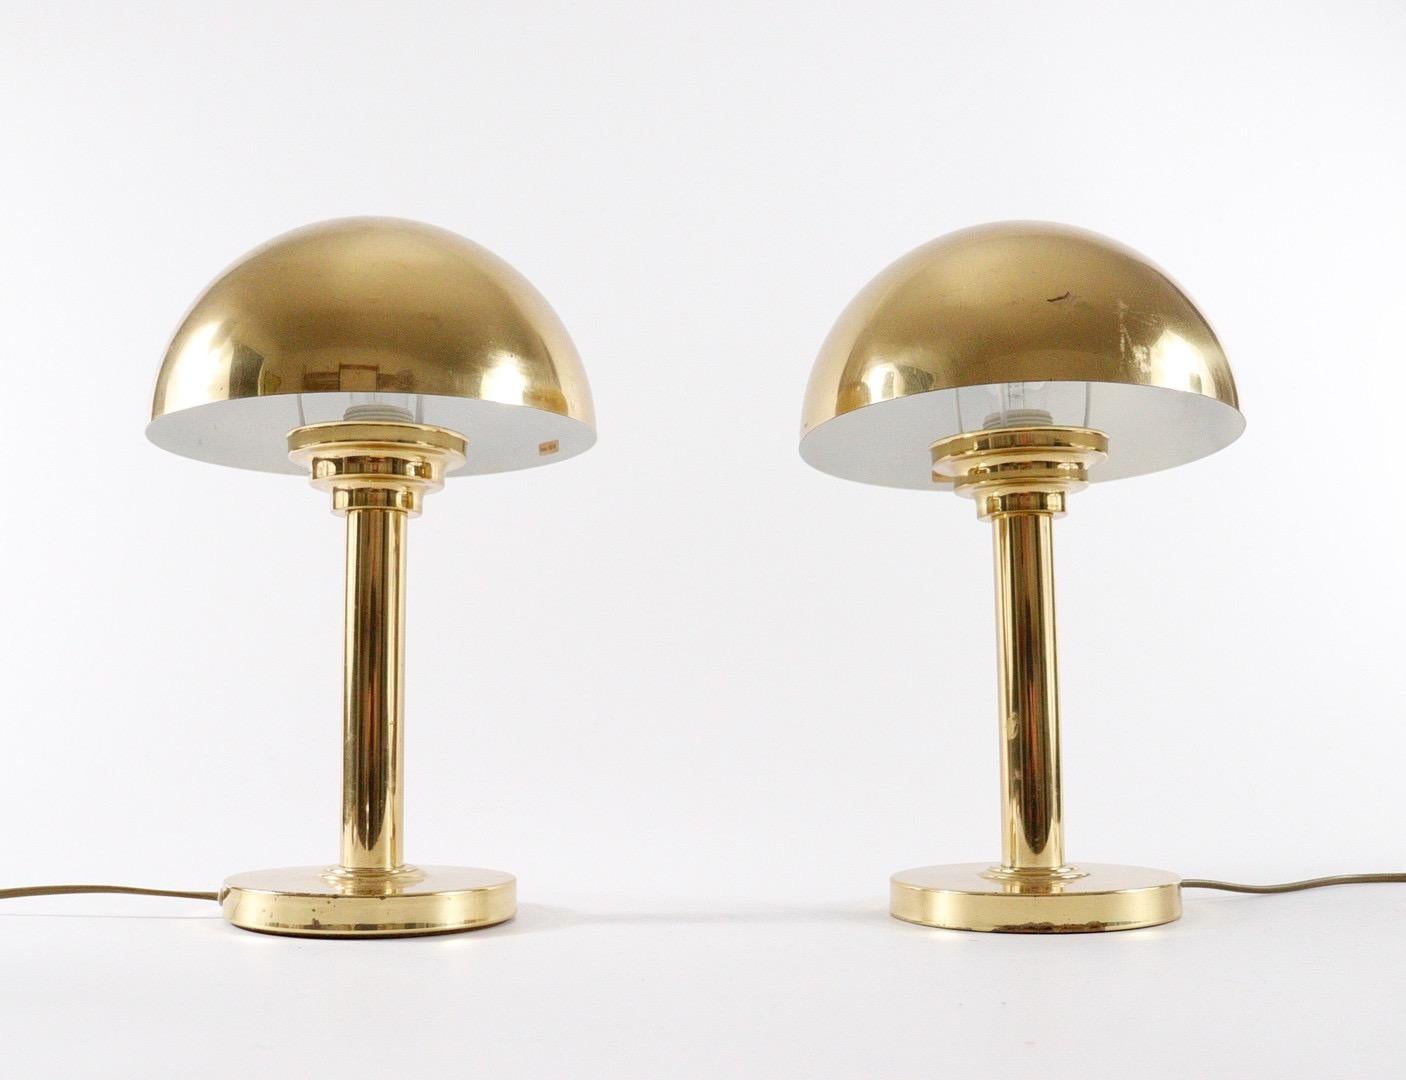 Brass Art Deco style table lamps. Made in Austria in the manner of Josef Hoffmann, in the 1970s. The lamps are made in polished brass that has become a very nice patination. Mushroom -shaped shades covers the socket element and creates a pleasant